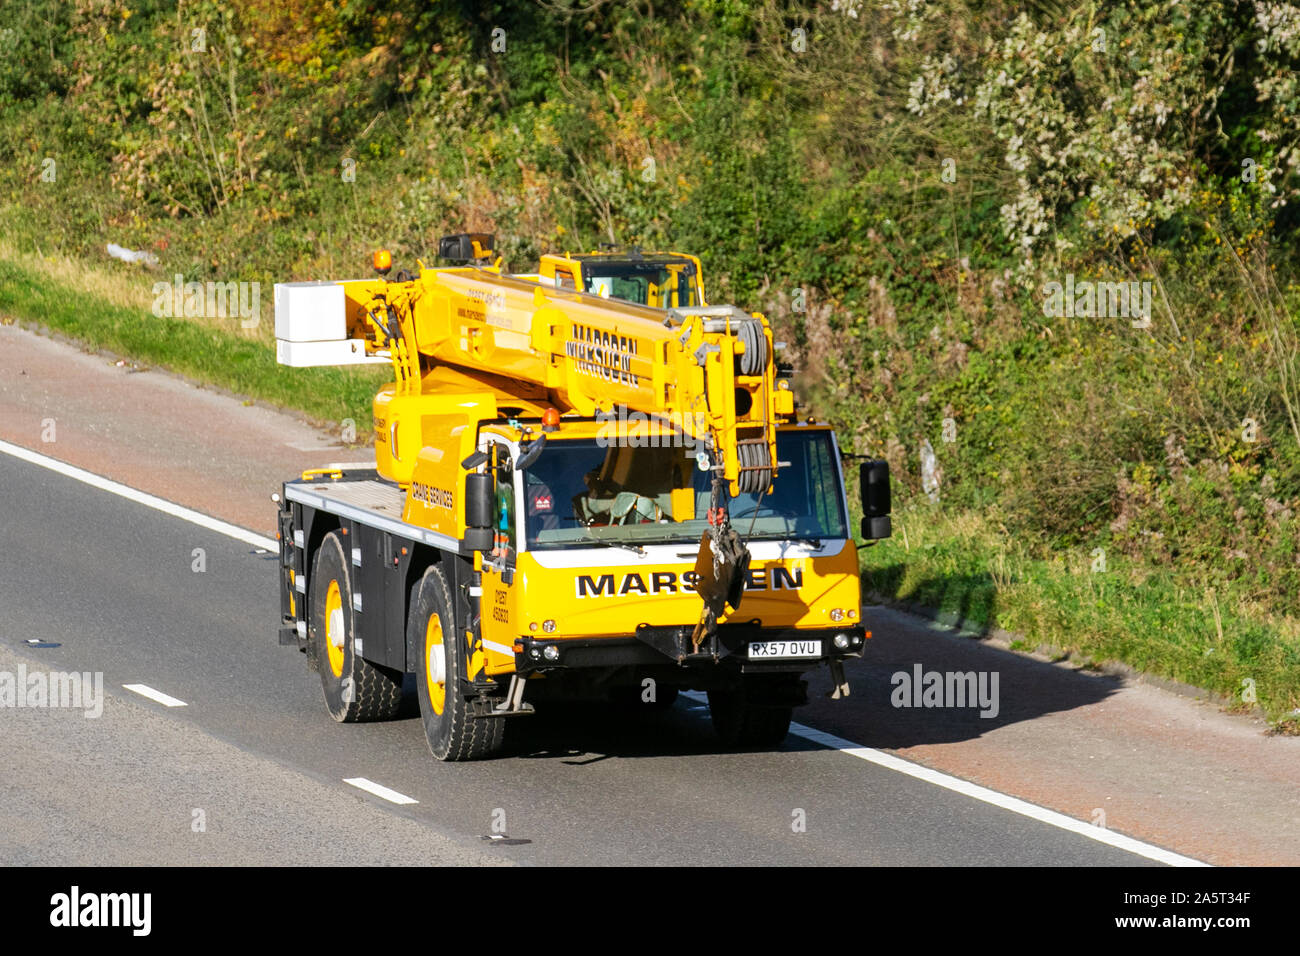 Marsden Crane 2018 Terex Demag; Services Plant and machinery hire, contract lifting, machinery removals; Heavy goods & commercial traffic, haulage, lorry, transportation, truck, vehicle, delivery, transport industry on the M6 southbound, UK Stock Photo